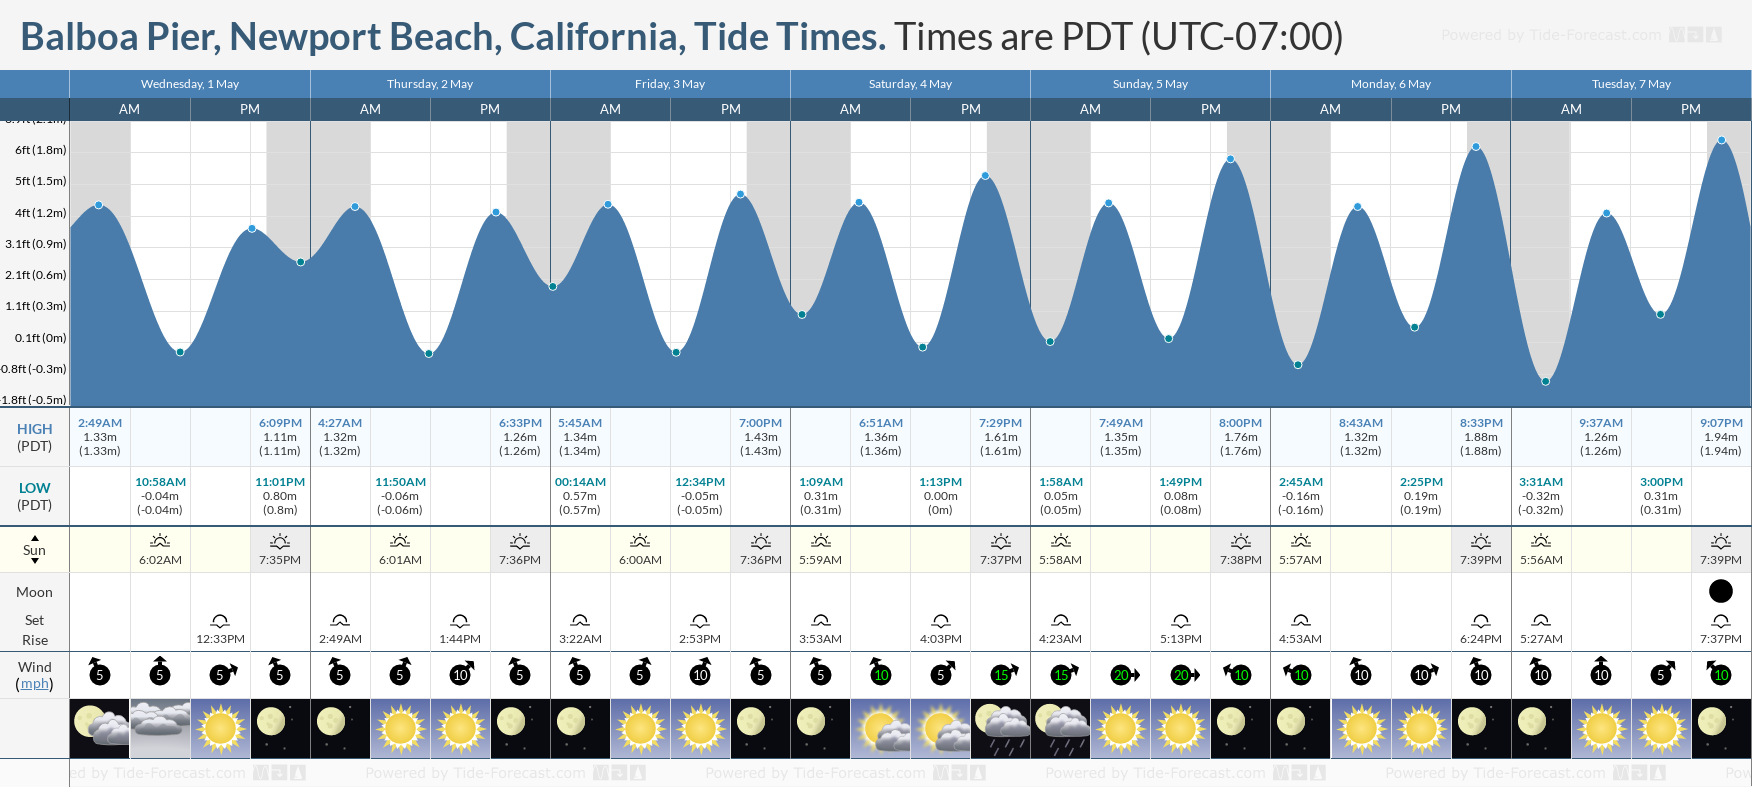 Balboa Pier, Newport Beach, California Tide Chart including high and low tide times for the next 7 days